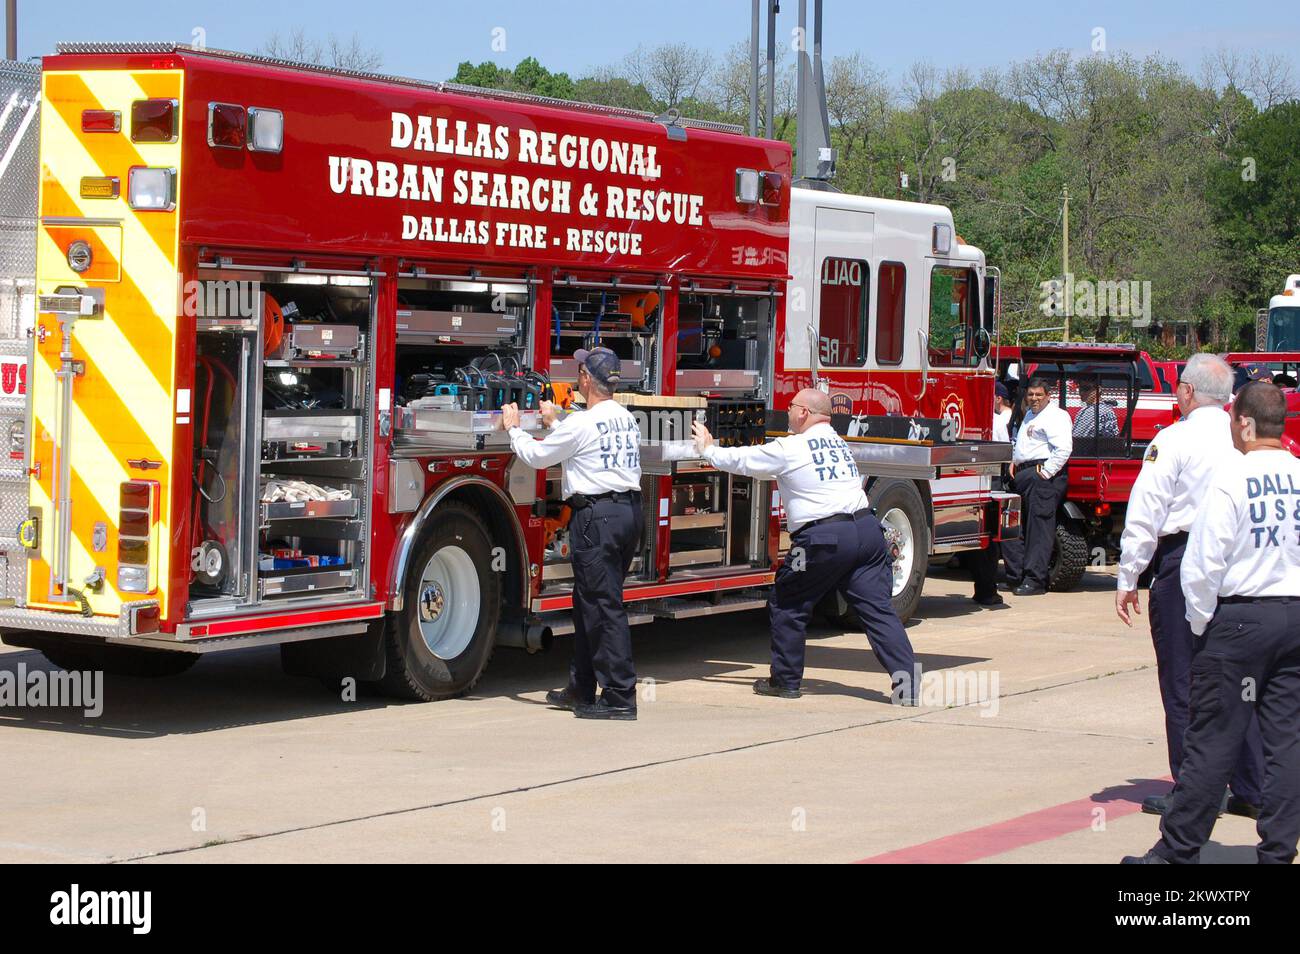 Dallas, TX, April 5, 2007   The Dallas Fire Department Regional Urban Search and Rescue Team - Texas Task Force 2, purchased life-saving emergency rescue gear and inter operable communications equipment after receiving a FEMA Assistance to Firefighters Grant check for $1.3 million dollars.  .. Photographs Relating to Disasters and Emergency Management Programs, Activities, and Officials Stock Photo